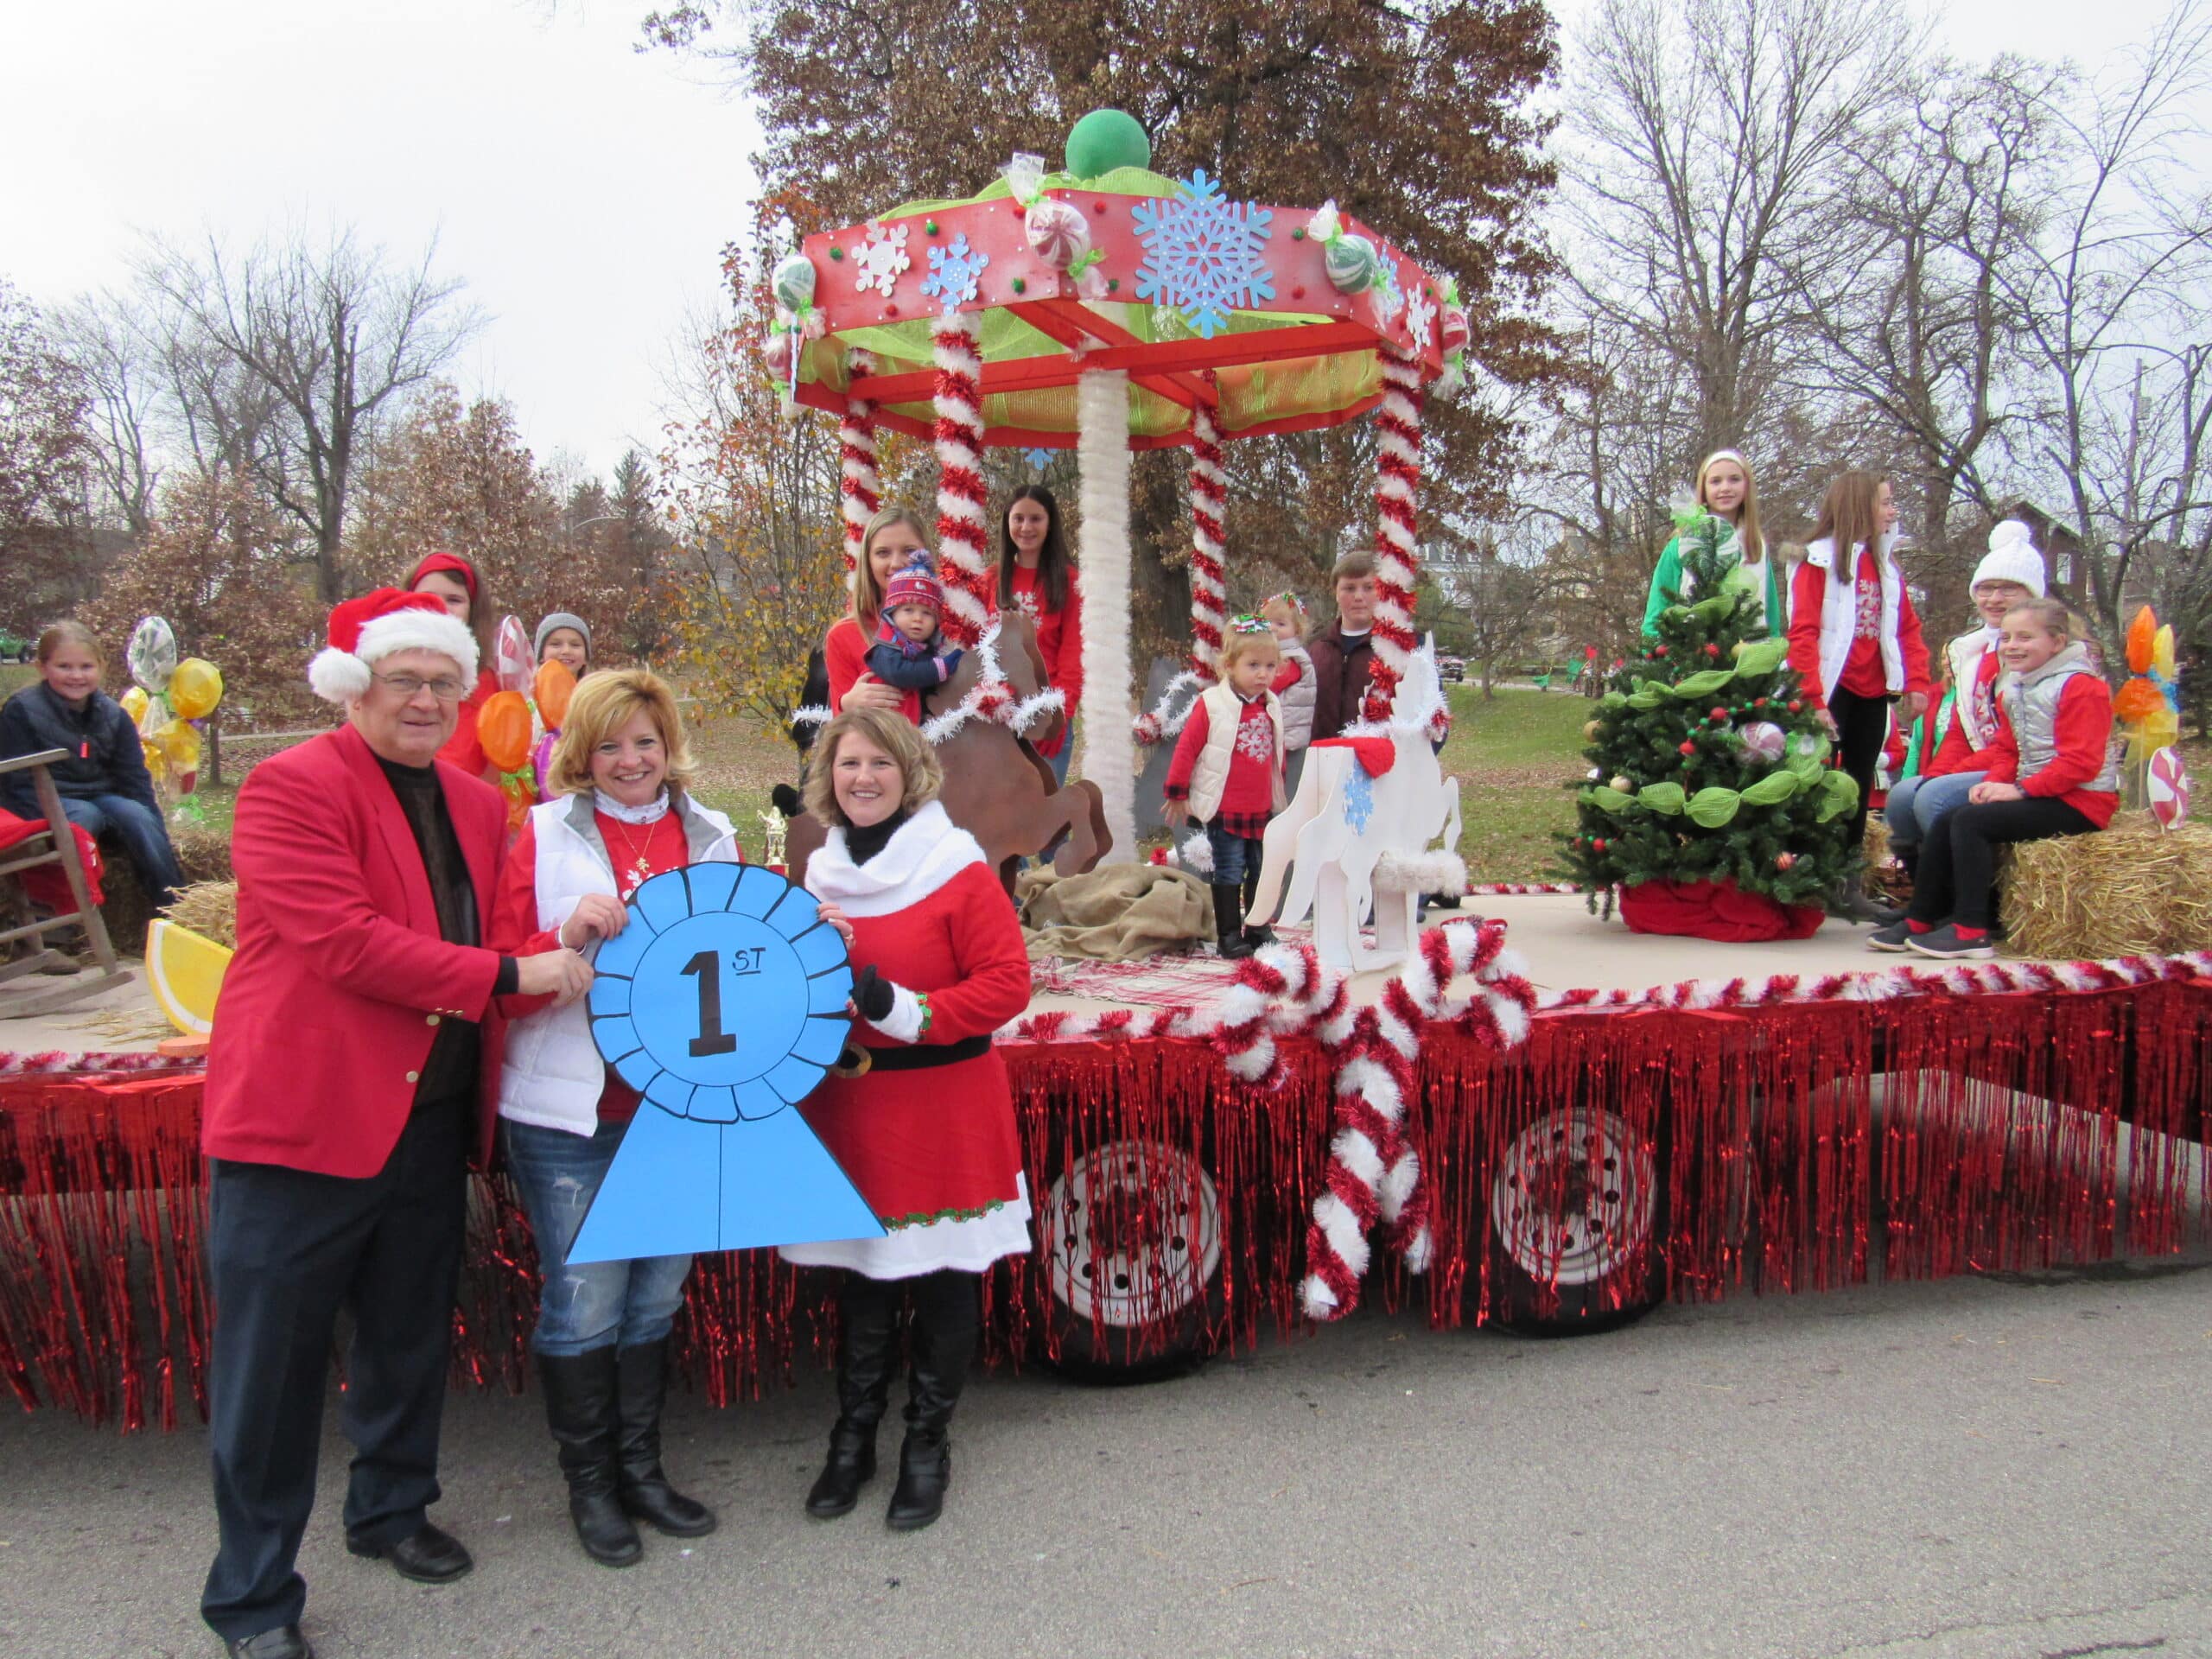 1st Place float in the annual downtown Waynesburg Christmas Parade.